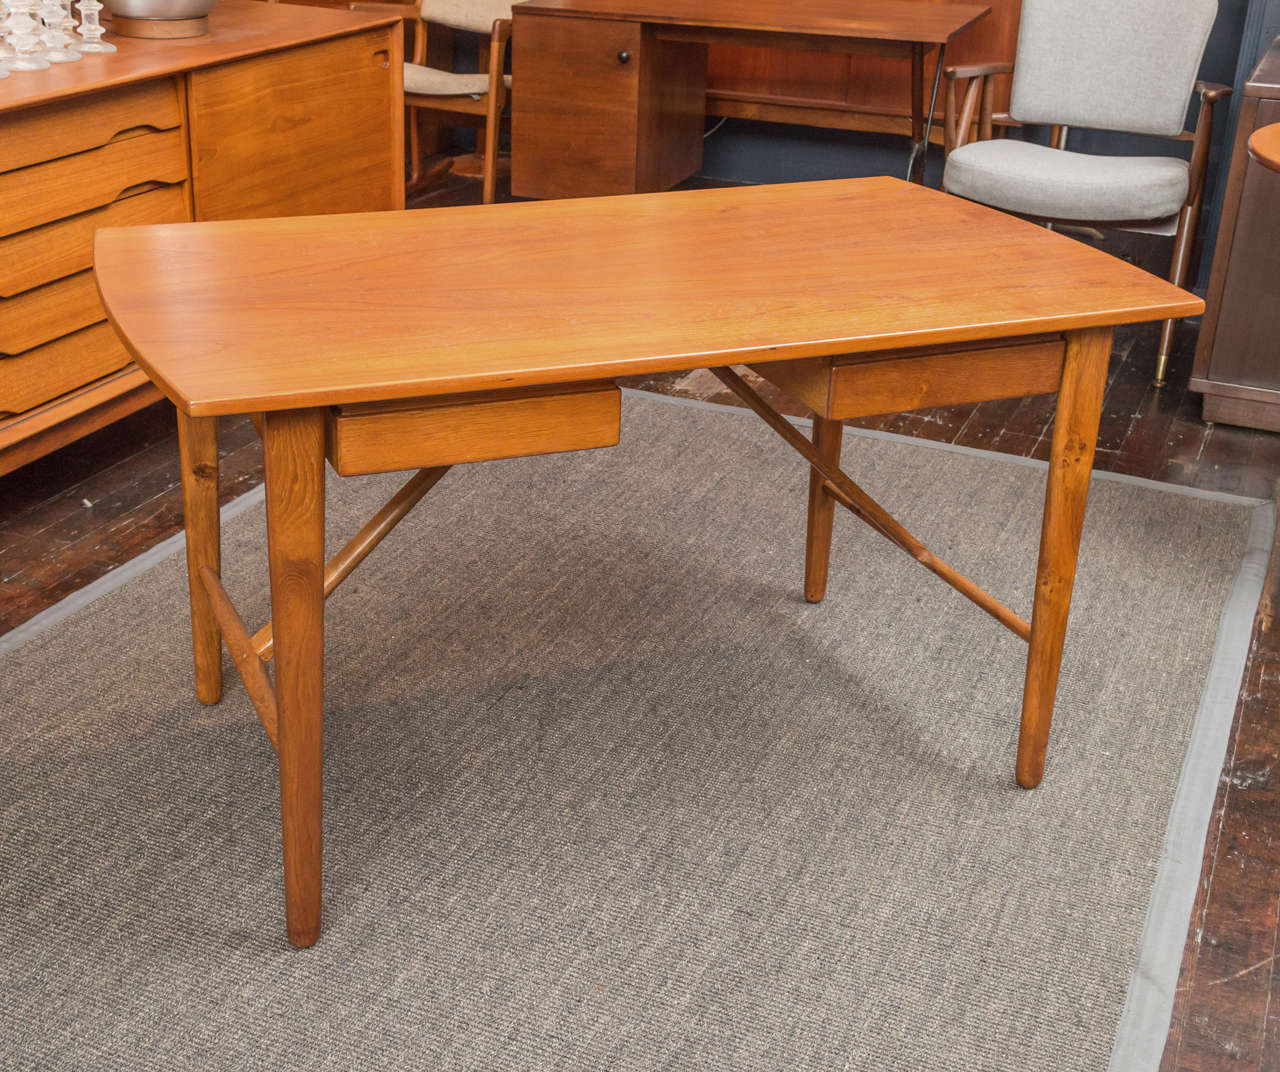 Teak table may be used as a table or desk; with extension leaves (removable) and supports; two drawers are visible and accessible from both sides.

H - 28 1/2